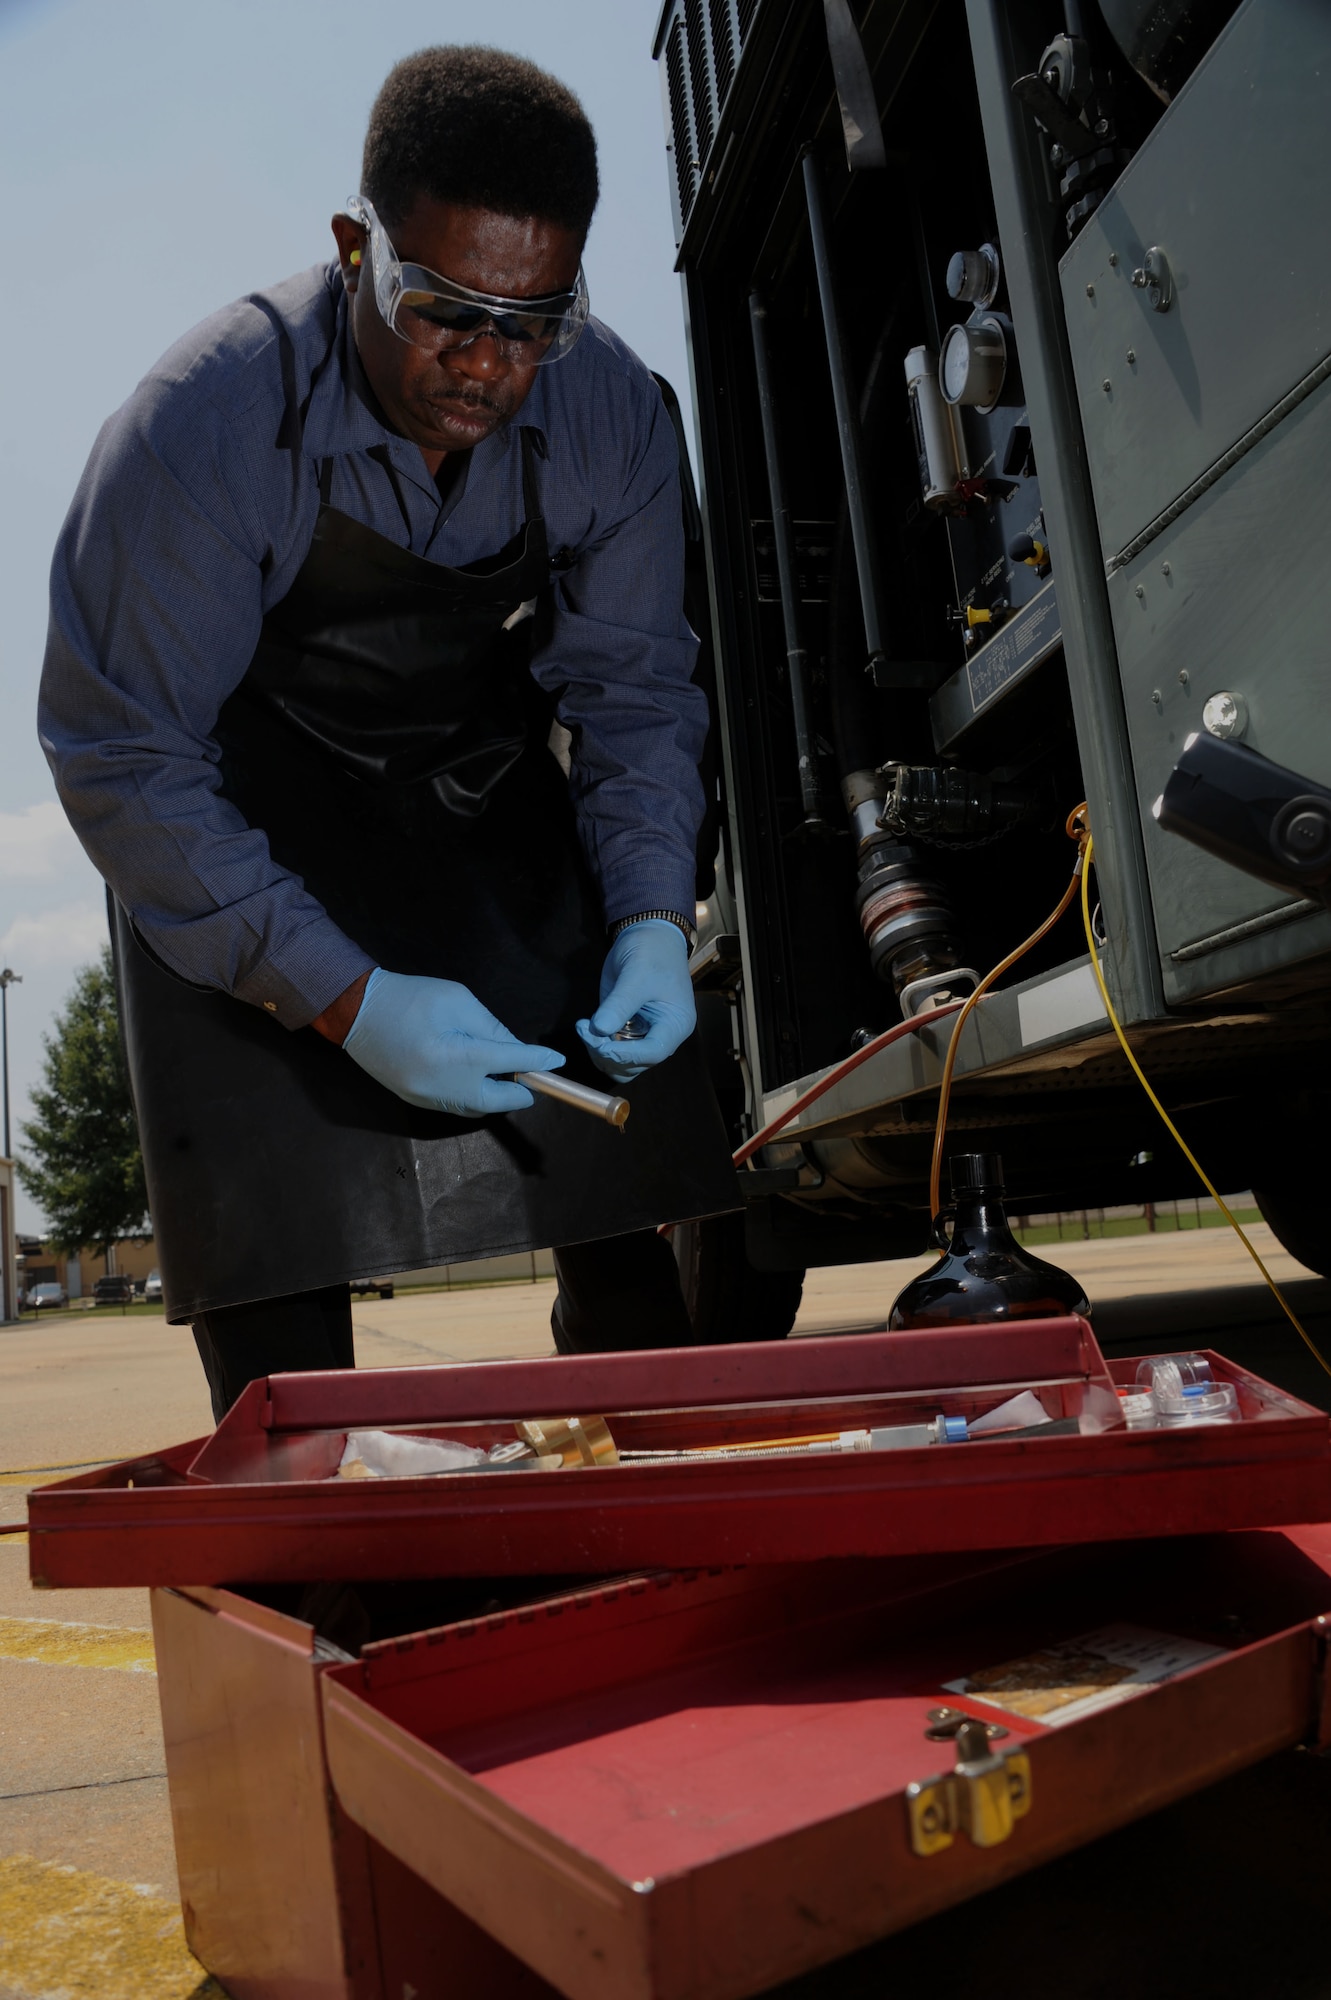 John Brown, a fuels lab supervisor and assistant manager from the 42nd Logistics and Readiness Squadron Fuels, extracts fuel from a tank truck at Maxwell Air Force Base Ala., Aug. 6, 2014. Brown was testing for excessive amounts of water and sediments in the fuel. (U.S Air Force photo/Airman 1st Class Alexa N. Culbert)